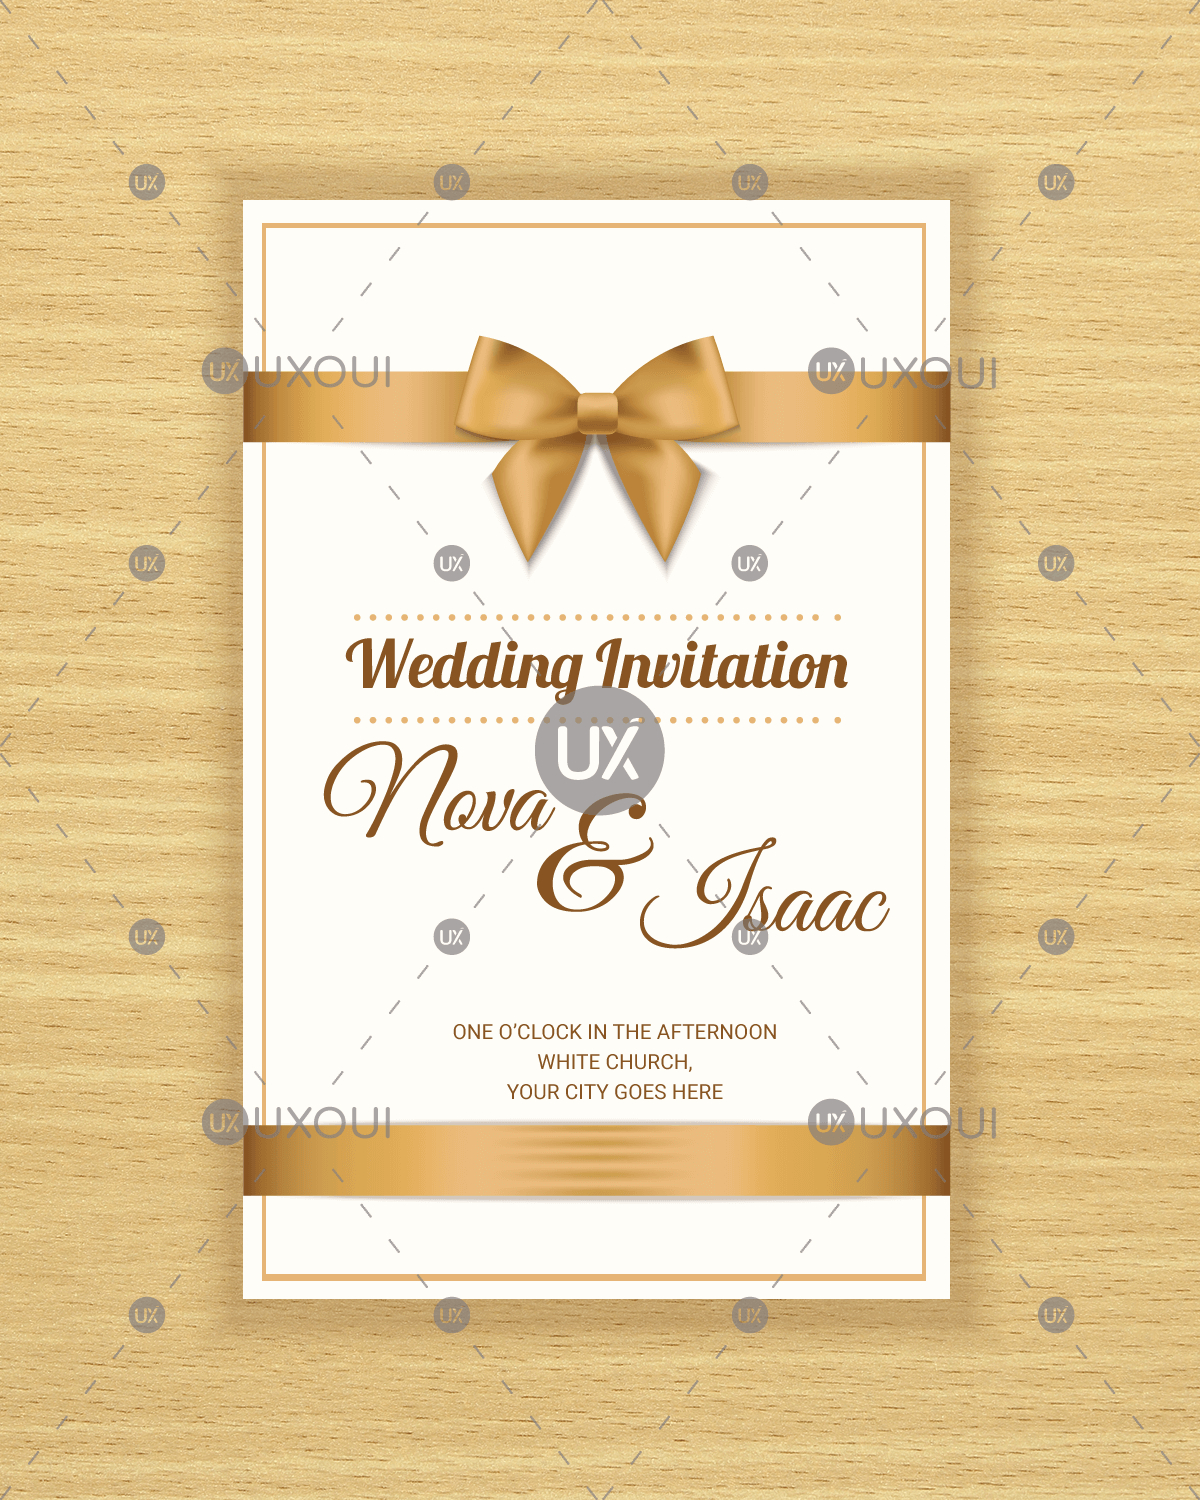 Free Retro Wedding Invitation Card Template Design Vector With A Ribbon Pertaining To Church Wedding Invitation Card Template